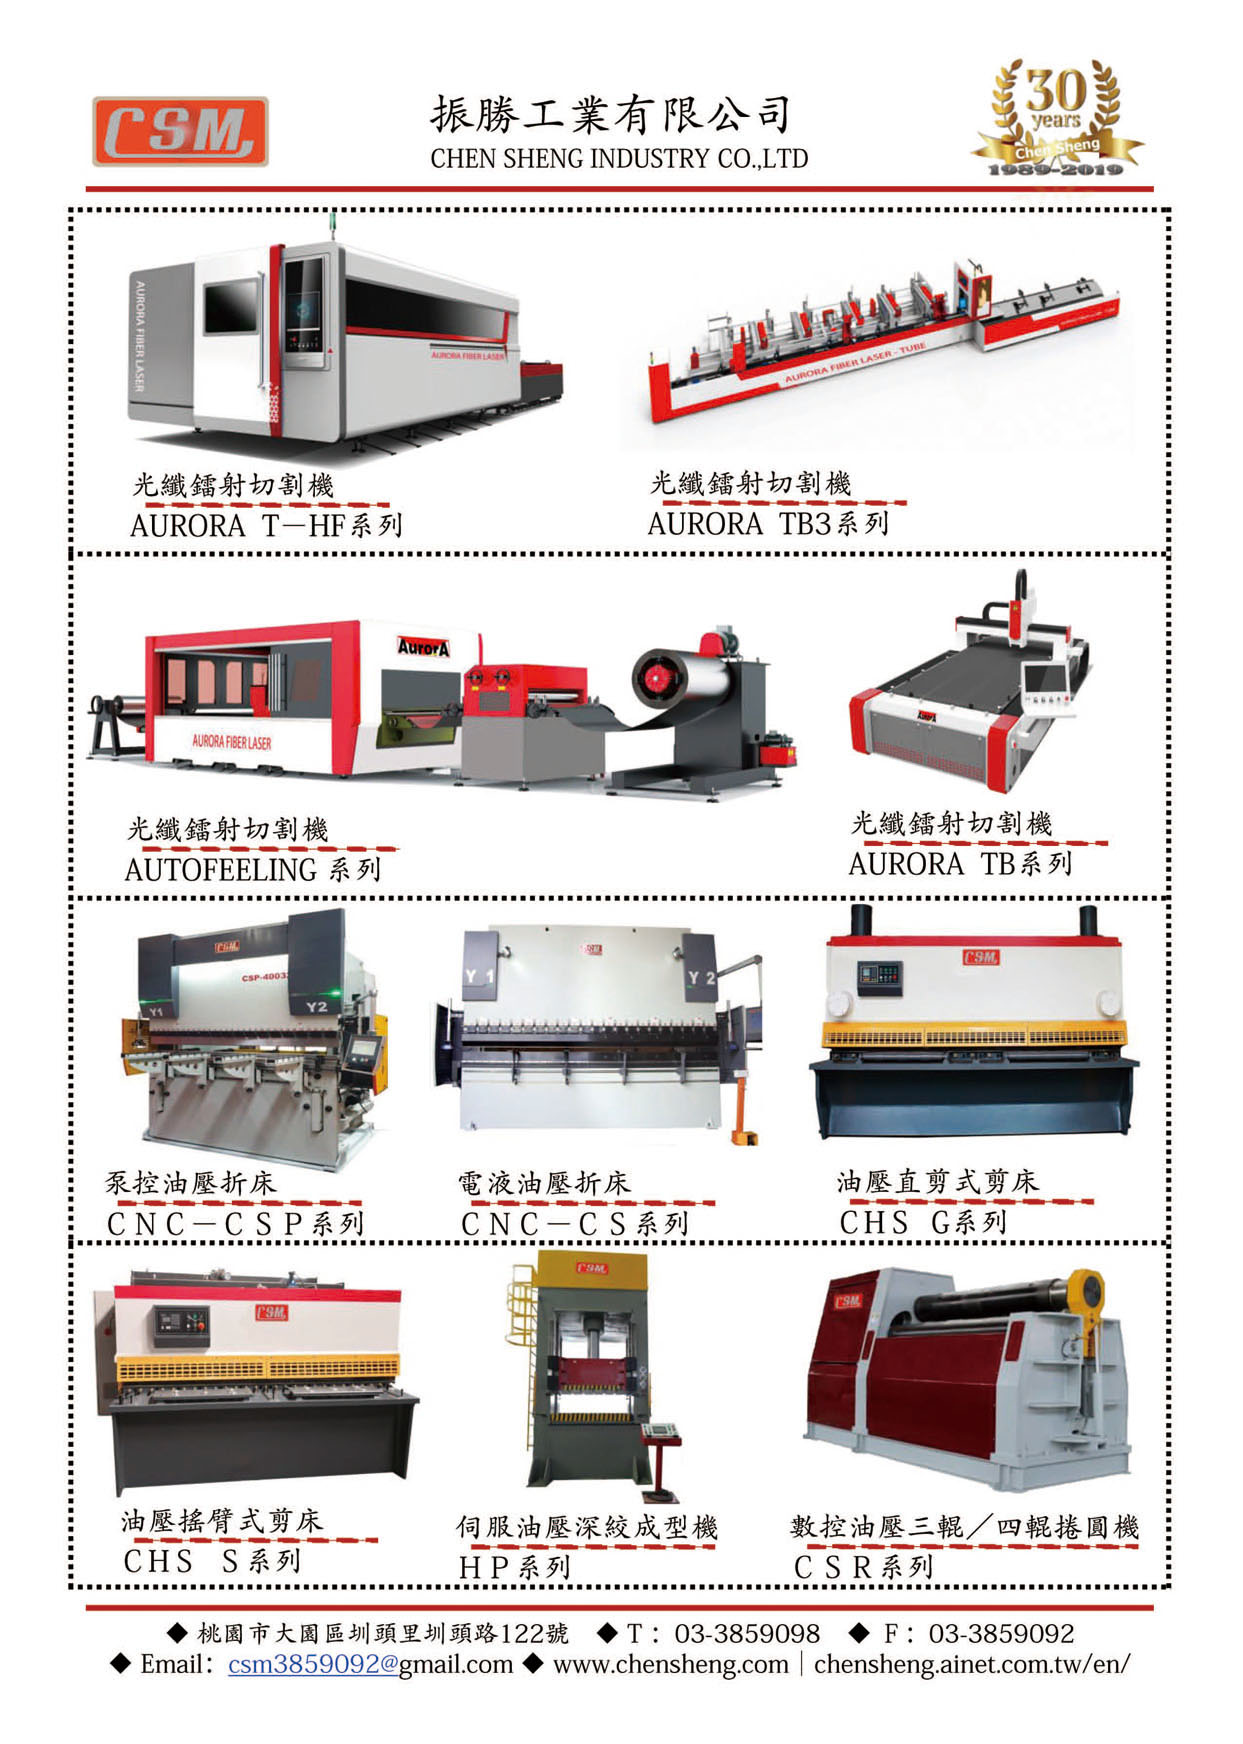 Who Makes Machinery in Taiwan (Chinese) CHEN SHENG INDUSTRY CO., LTD.